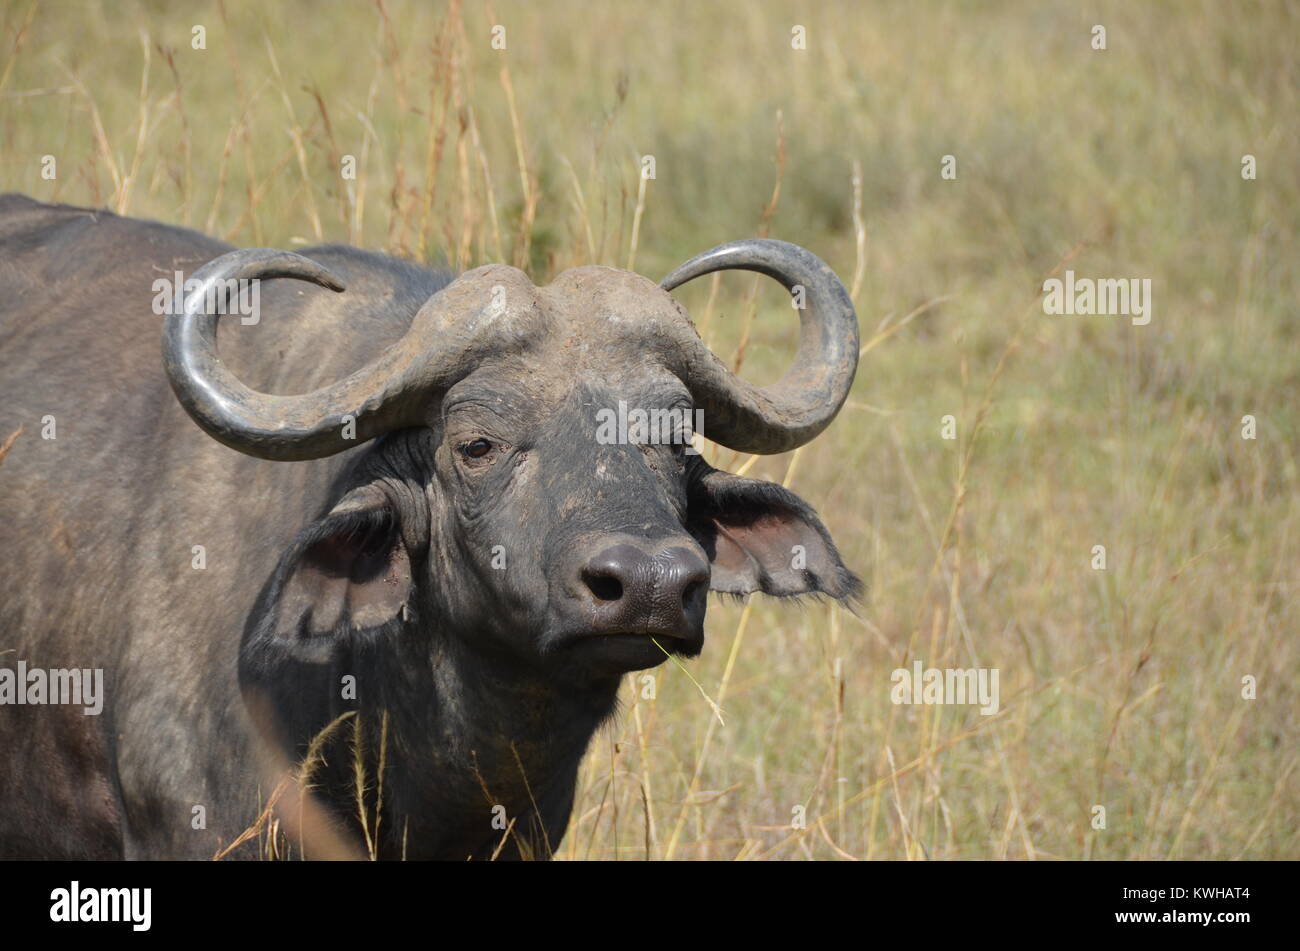 Adult male African Buffalo at Nairobi National Park. The African Buffalo is a member of the big five game animals. Stock Photo